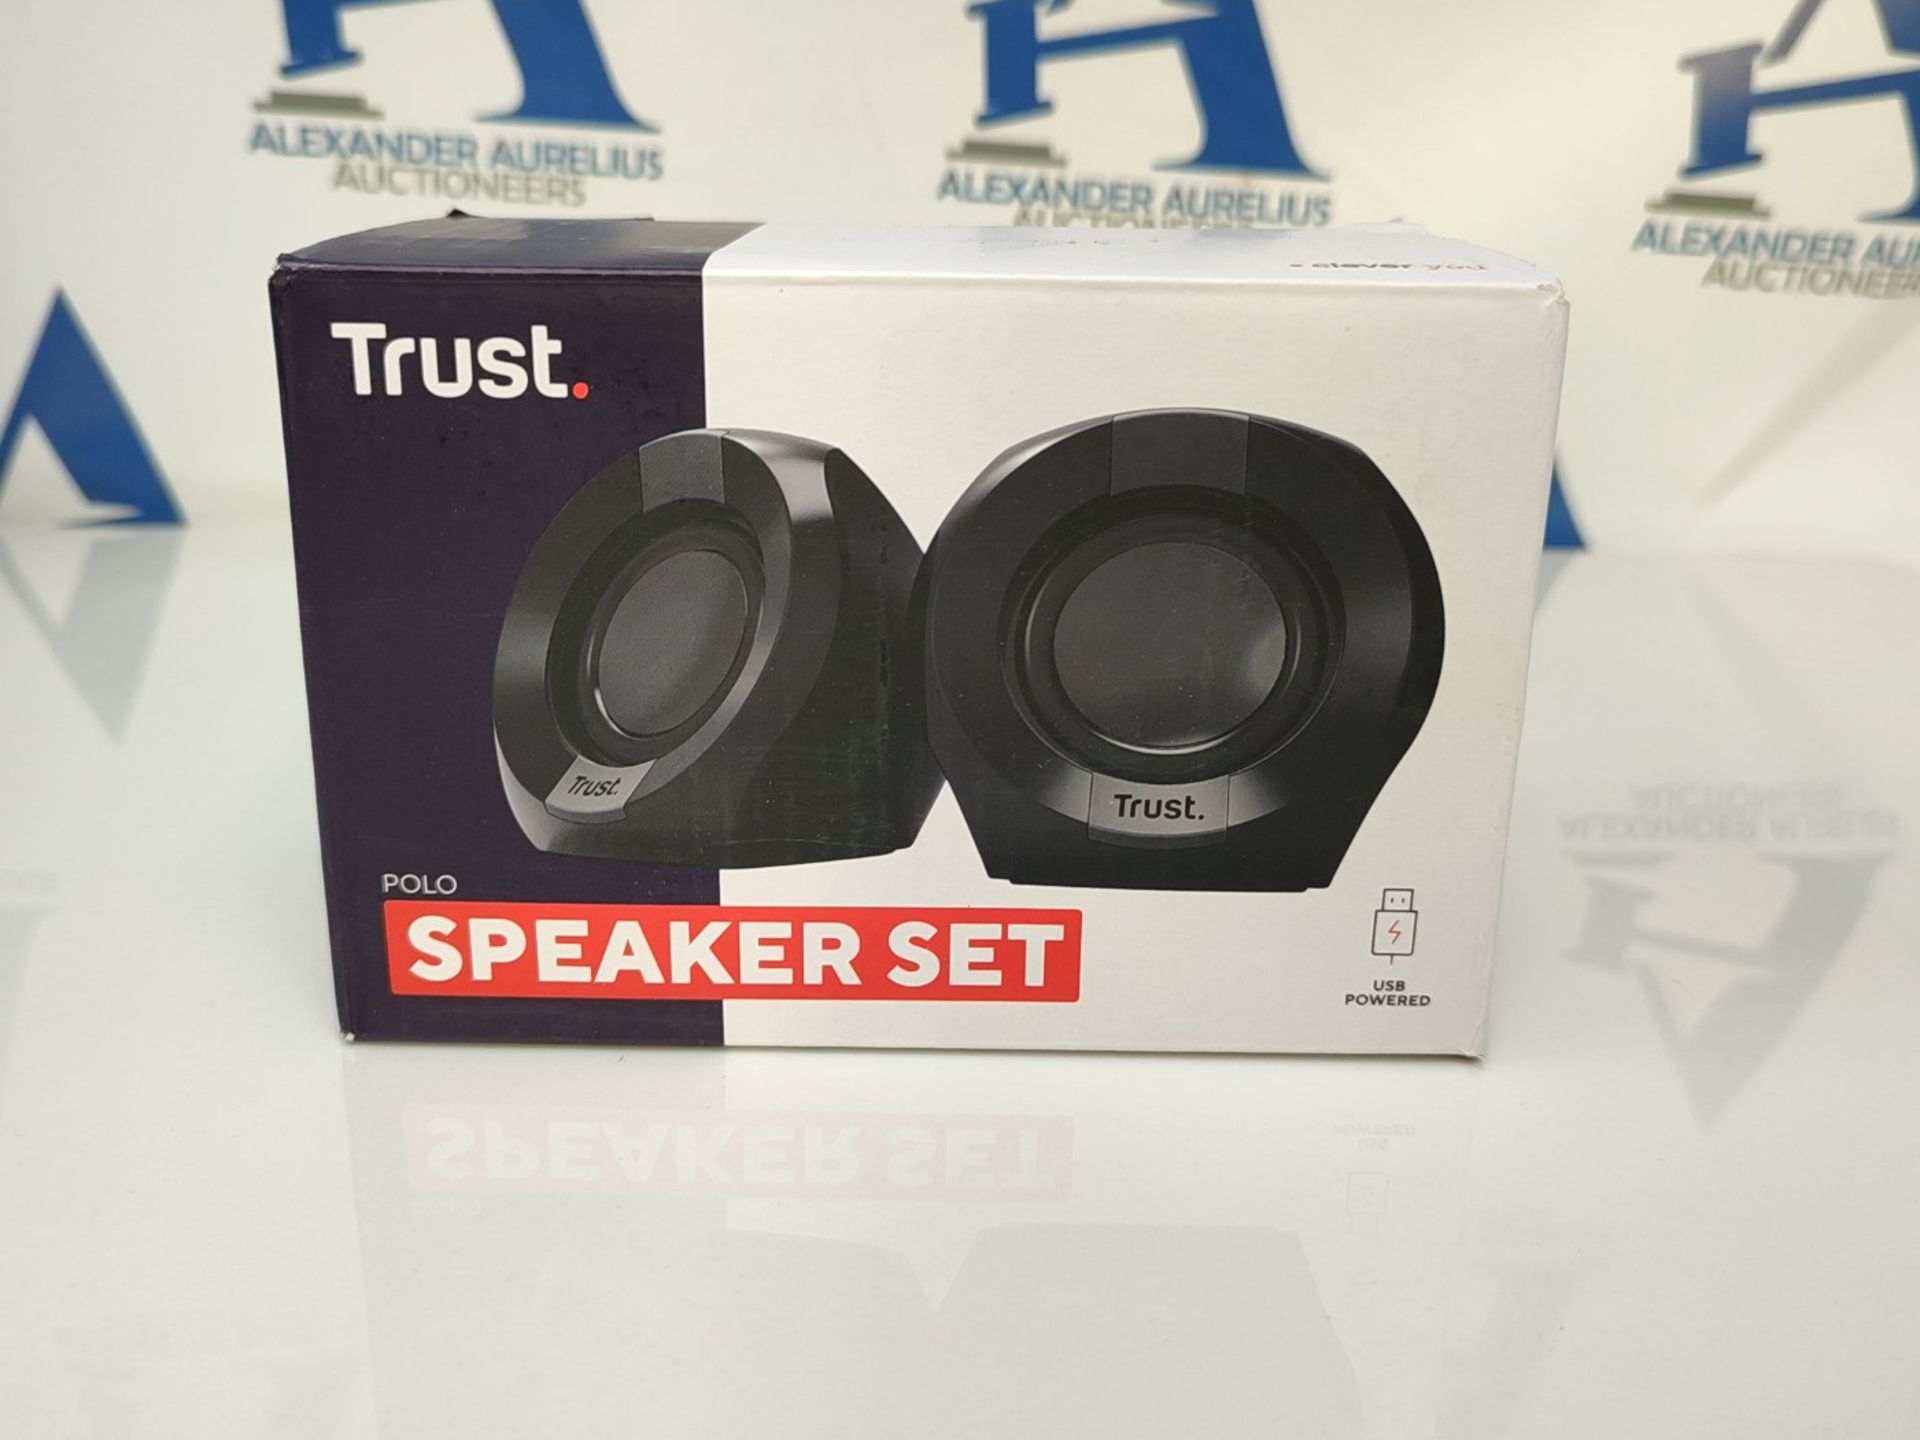 Trust Polo Small PC Speakers 2.0, 8W (4W RMS), Compact speaker set, USB powered speake - Image 2 of 6